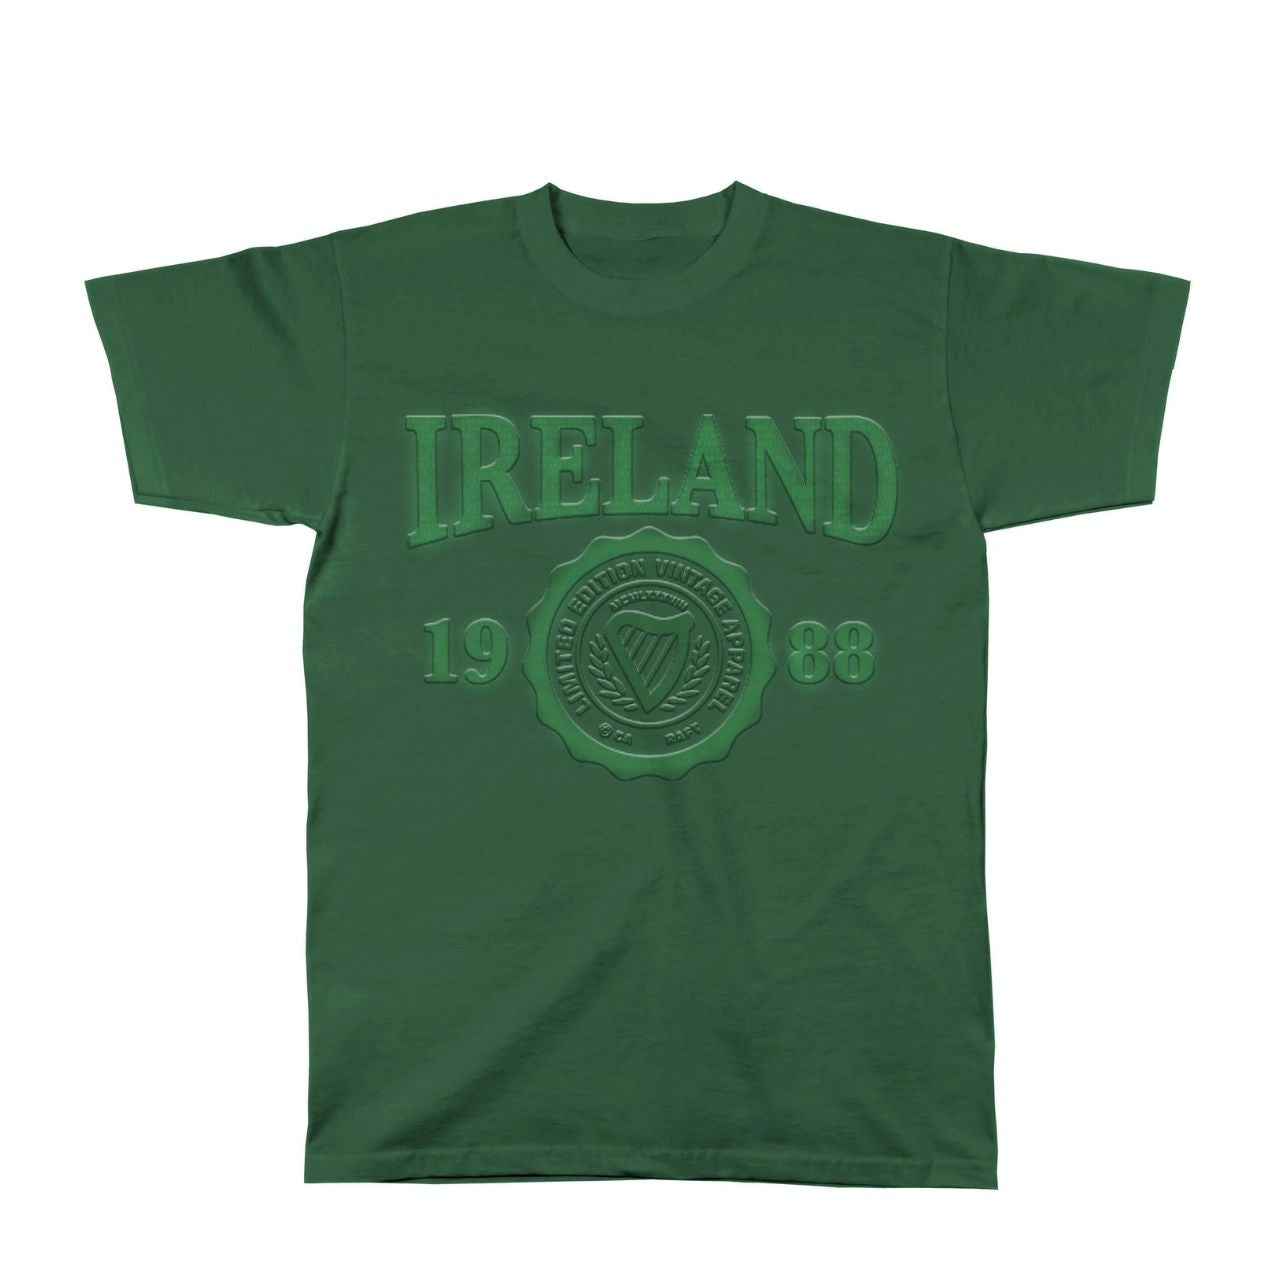 Cara Craft Ireland Bottle Green Embossed 1988 T-Shirt  - 100% cotton - Ash 99% cotton,1% polyester - Crew Neck - Designed And Printed in Ireland By Cara craft - Machine Washable